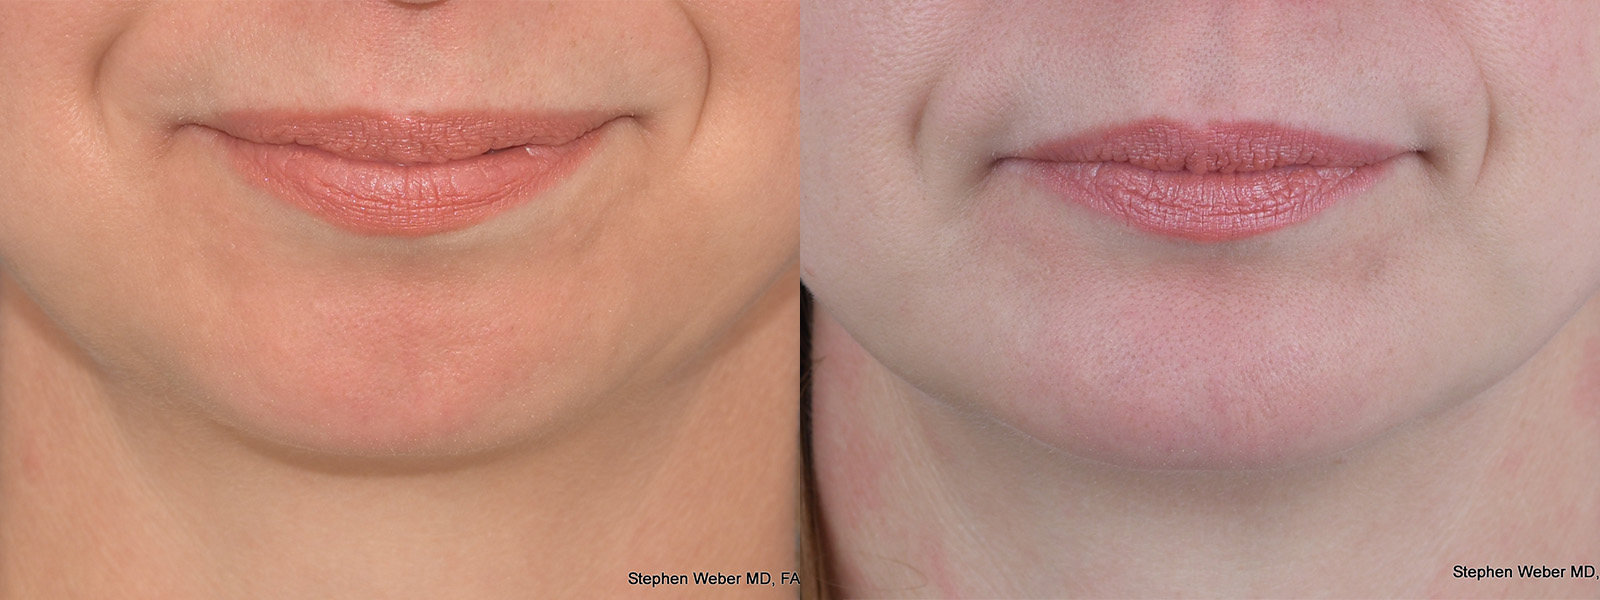 Chin Implant Before and After | Weber Facial Plastic Surgery